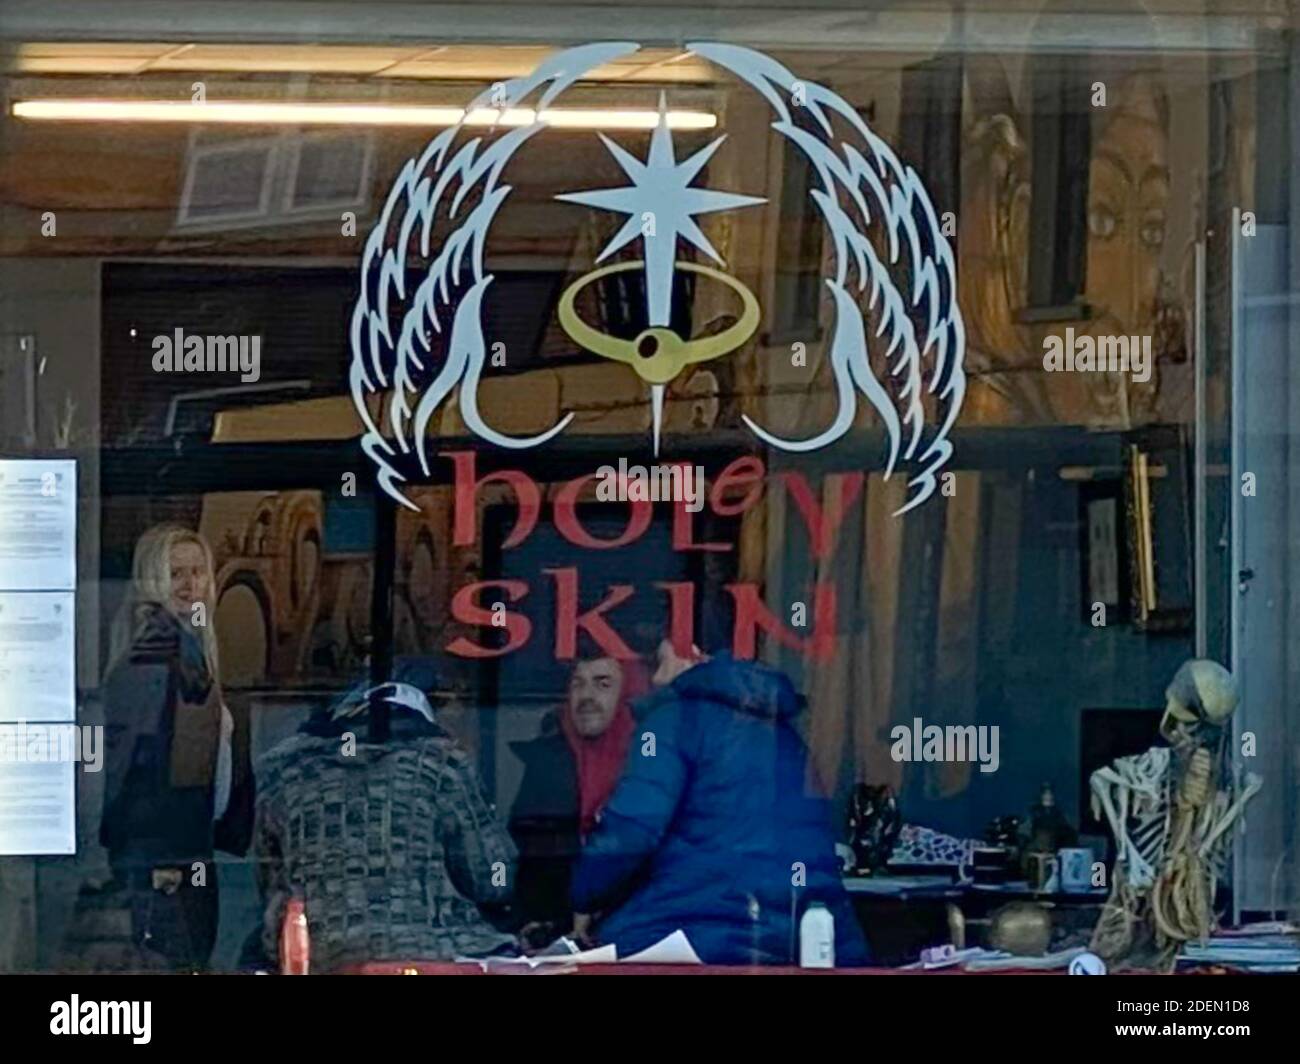 Bristol, UK. 26th November 2020. Bristol based tattoo studio, Holey Skin, has reopened less than 2 weeks after being fined for breaching government lo Stock Photo